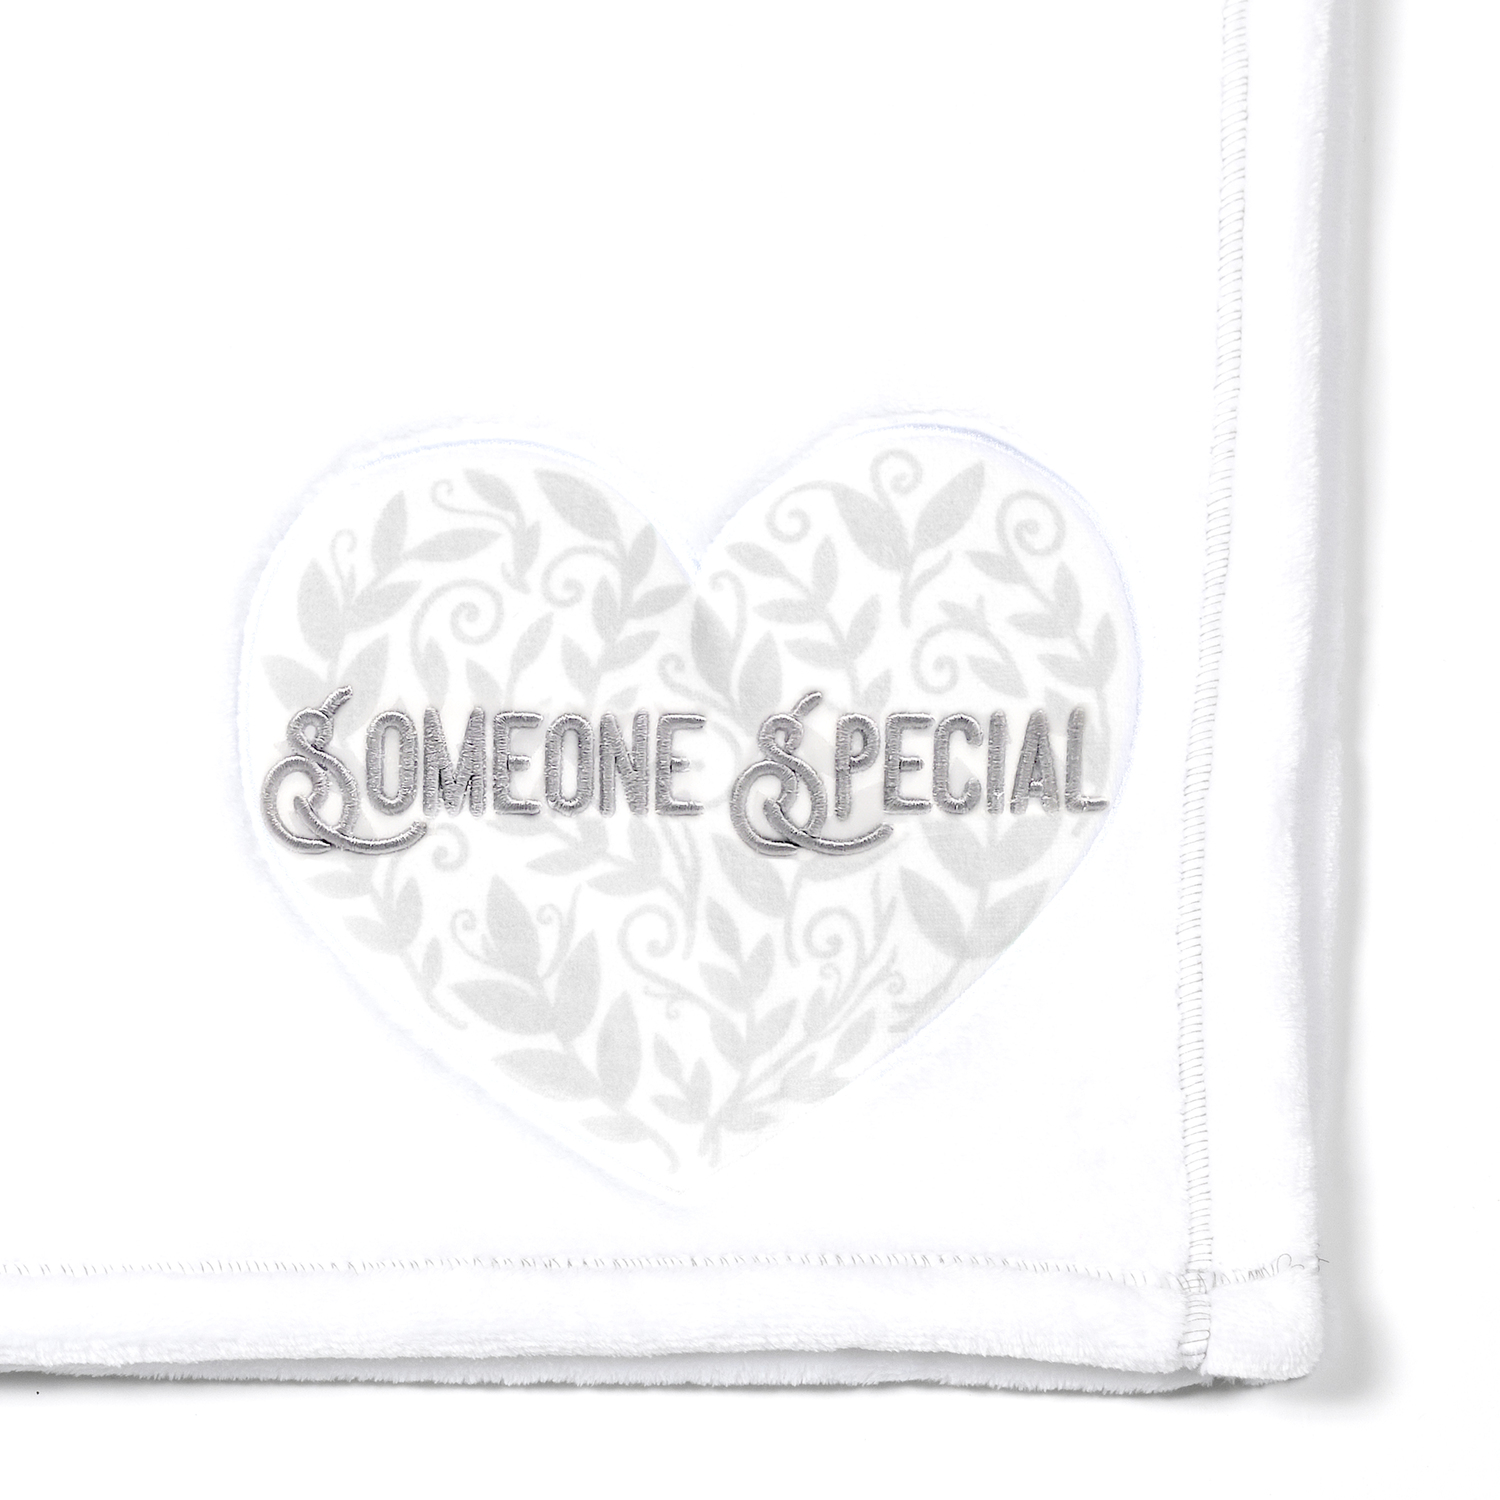 Someone Special - Vines by Comfort Blanket - Someone Special - Vines - 50" x 60" Royal Plush Blanket